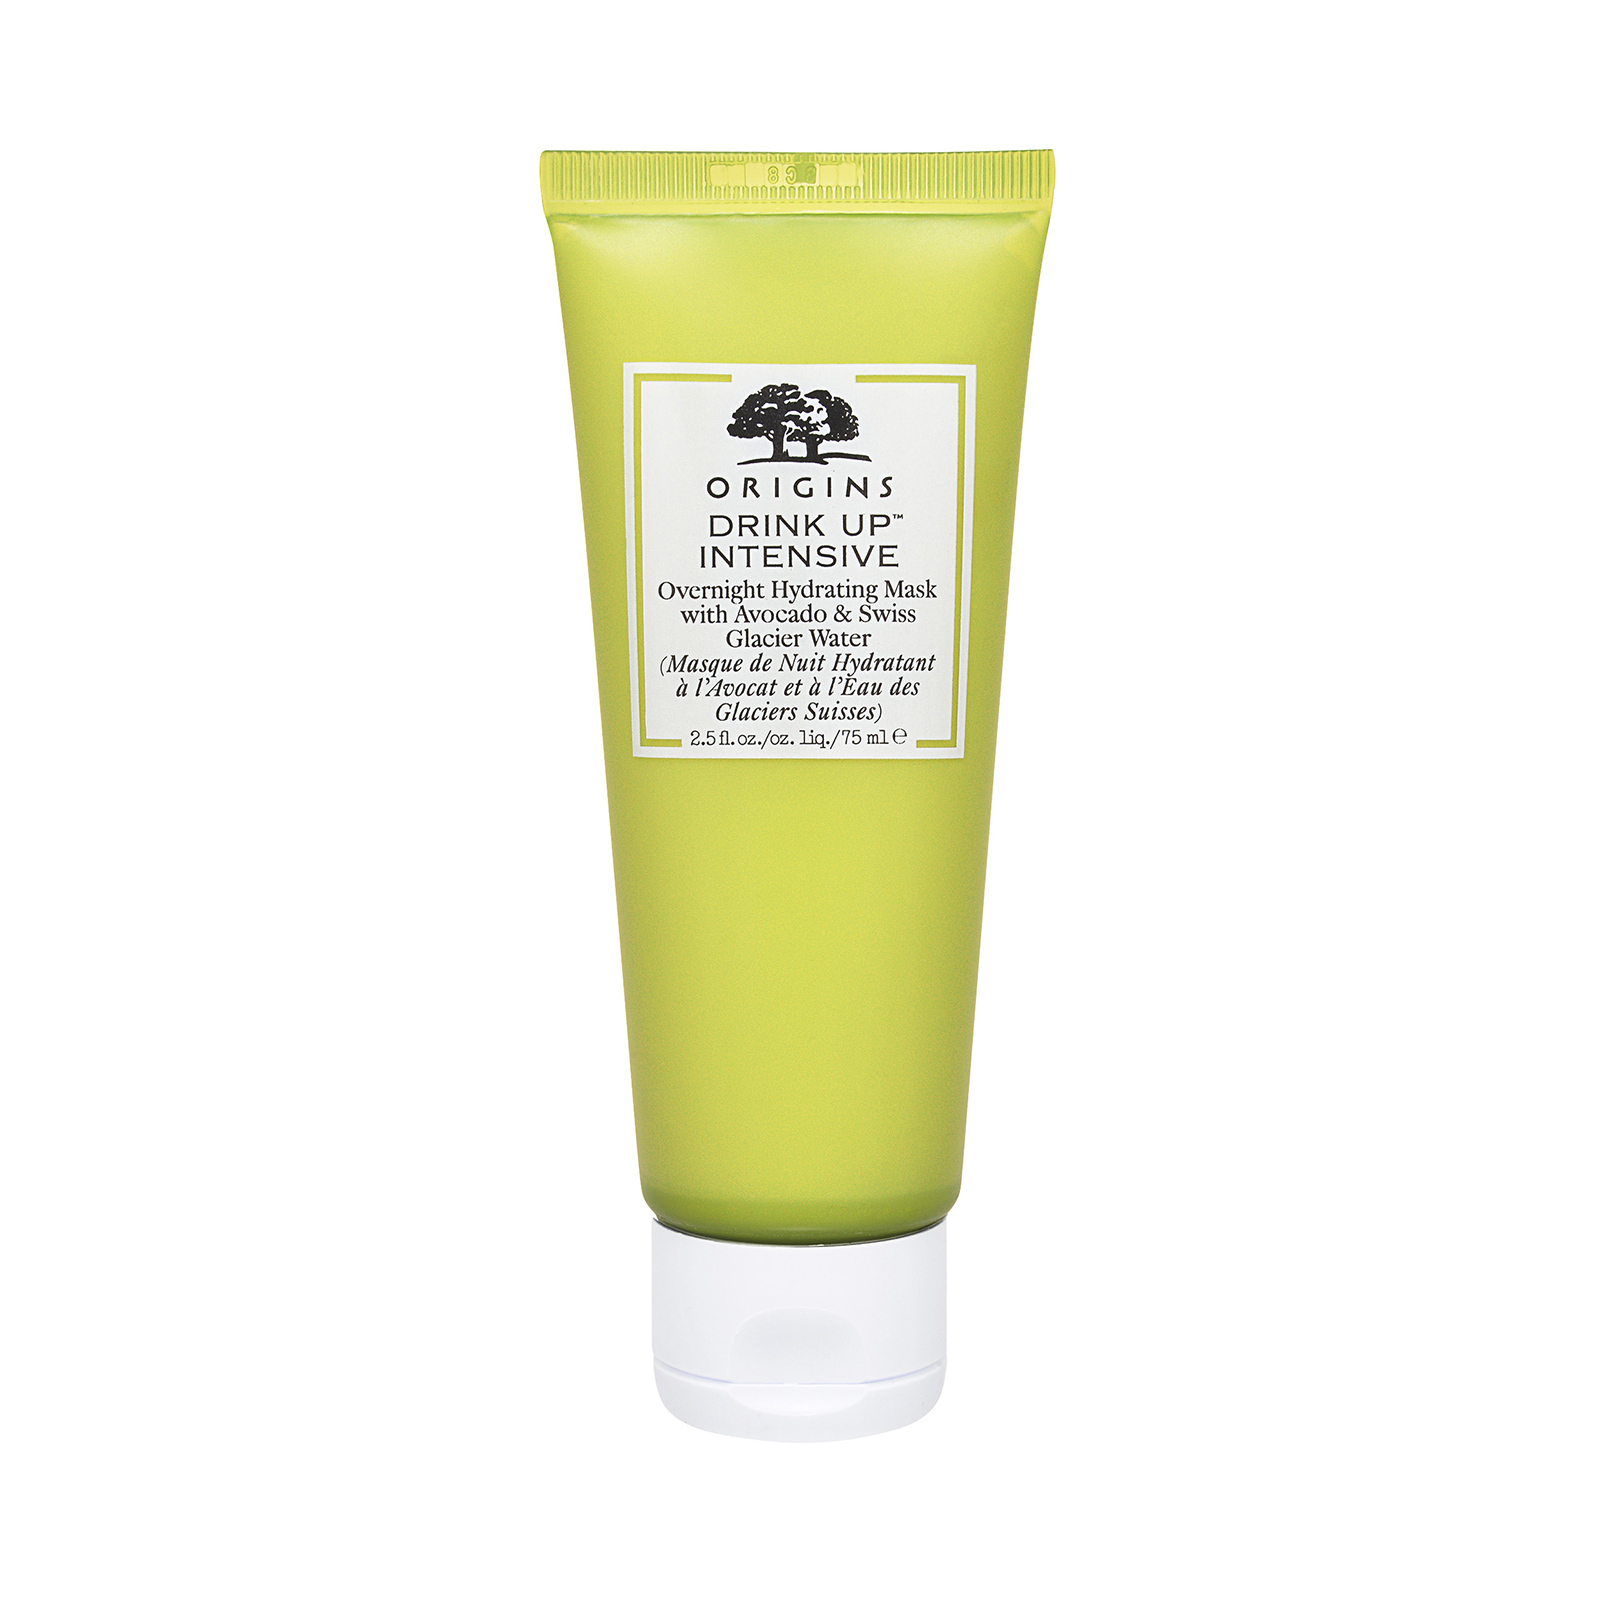 Drink Up™ Intensive Overnight Hydrating Mask With Avocado & Swiss Glacier Water